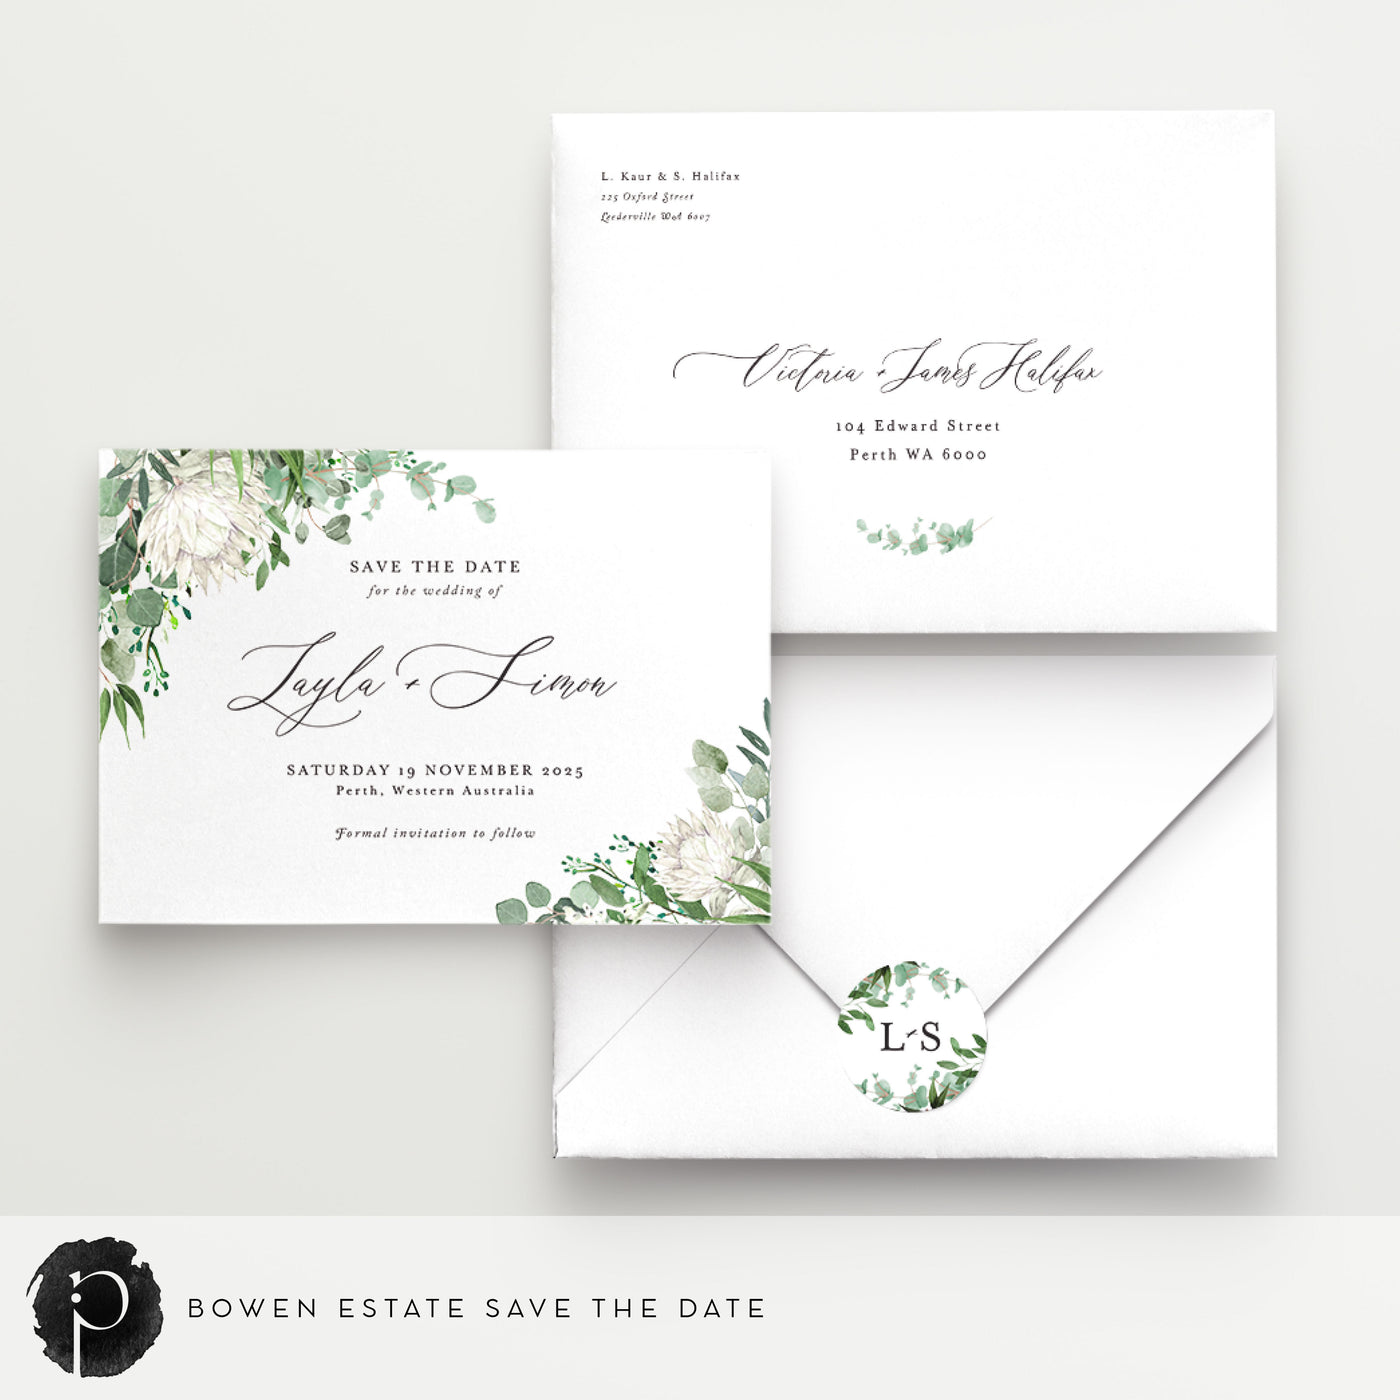 Bowen Estate - Save The Date Cards